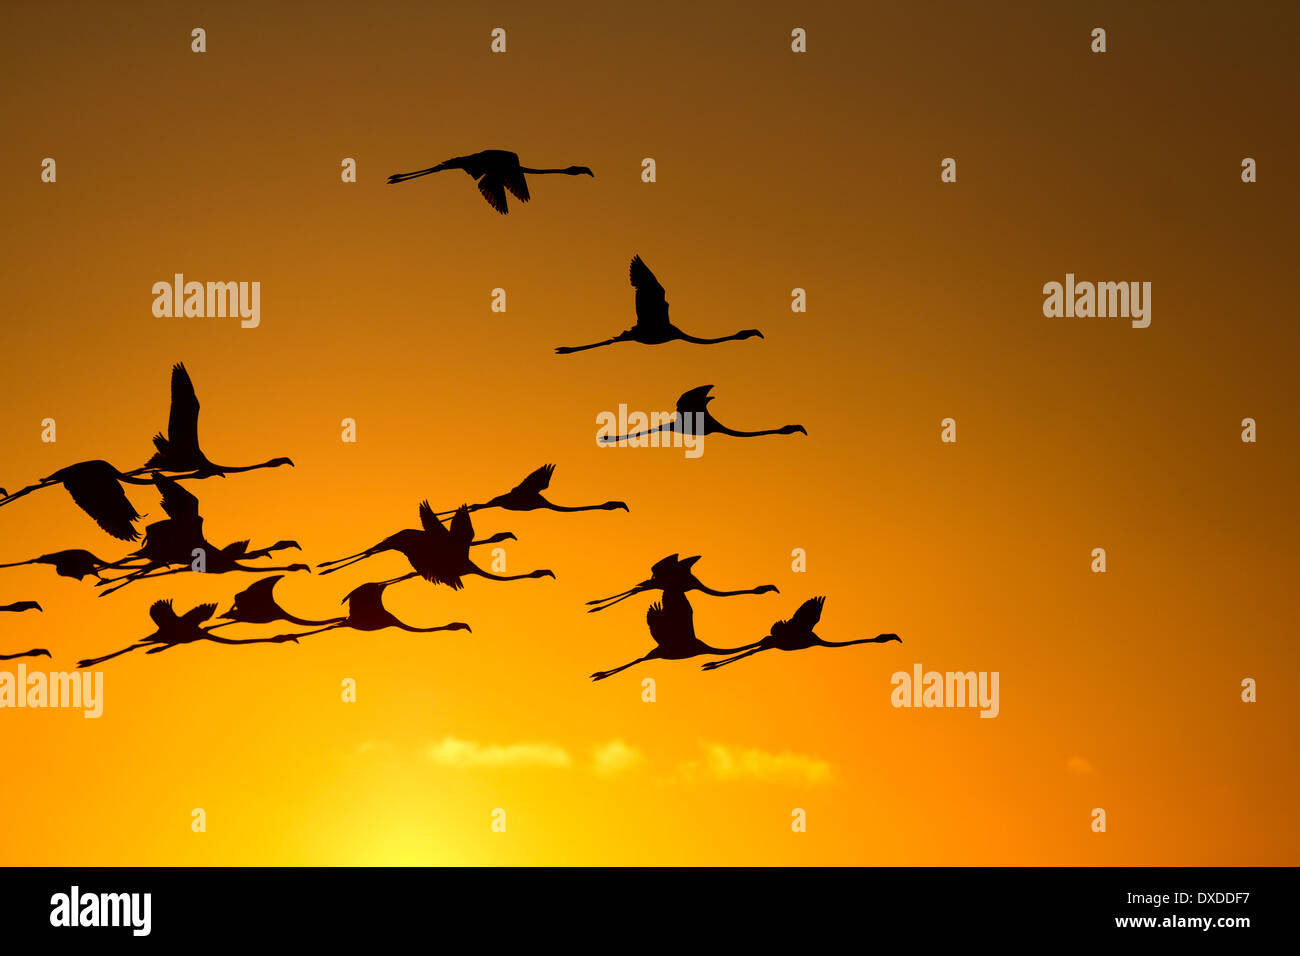 Flying flamingos at sunset silhouettes Stock Photo